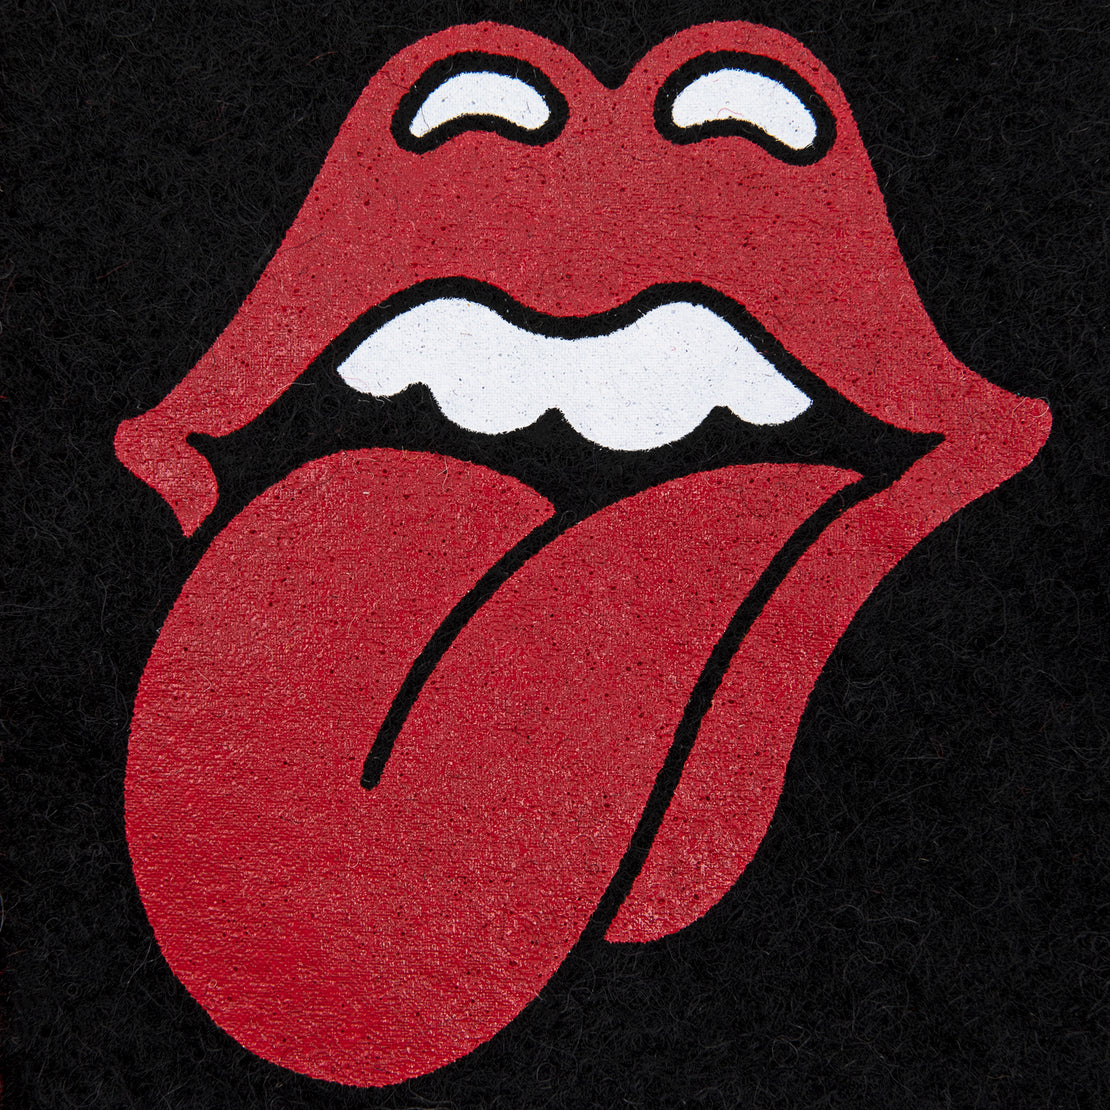 Rolling Stones Pennant - Oxford Pennant - STAG Provisions - Home - Art & Accesories - Decorative Object